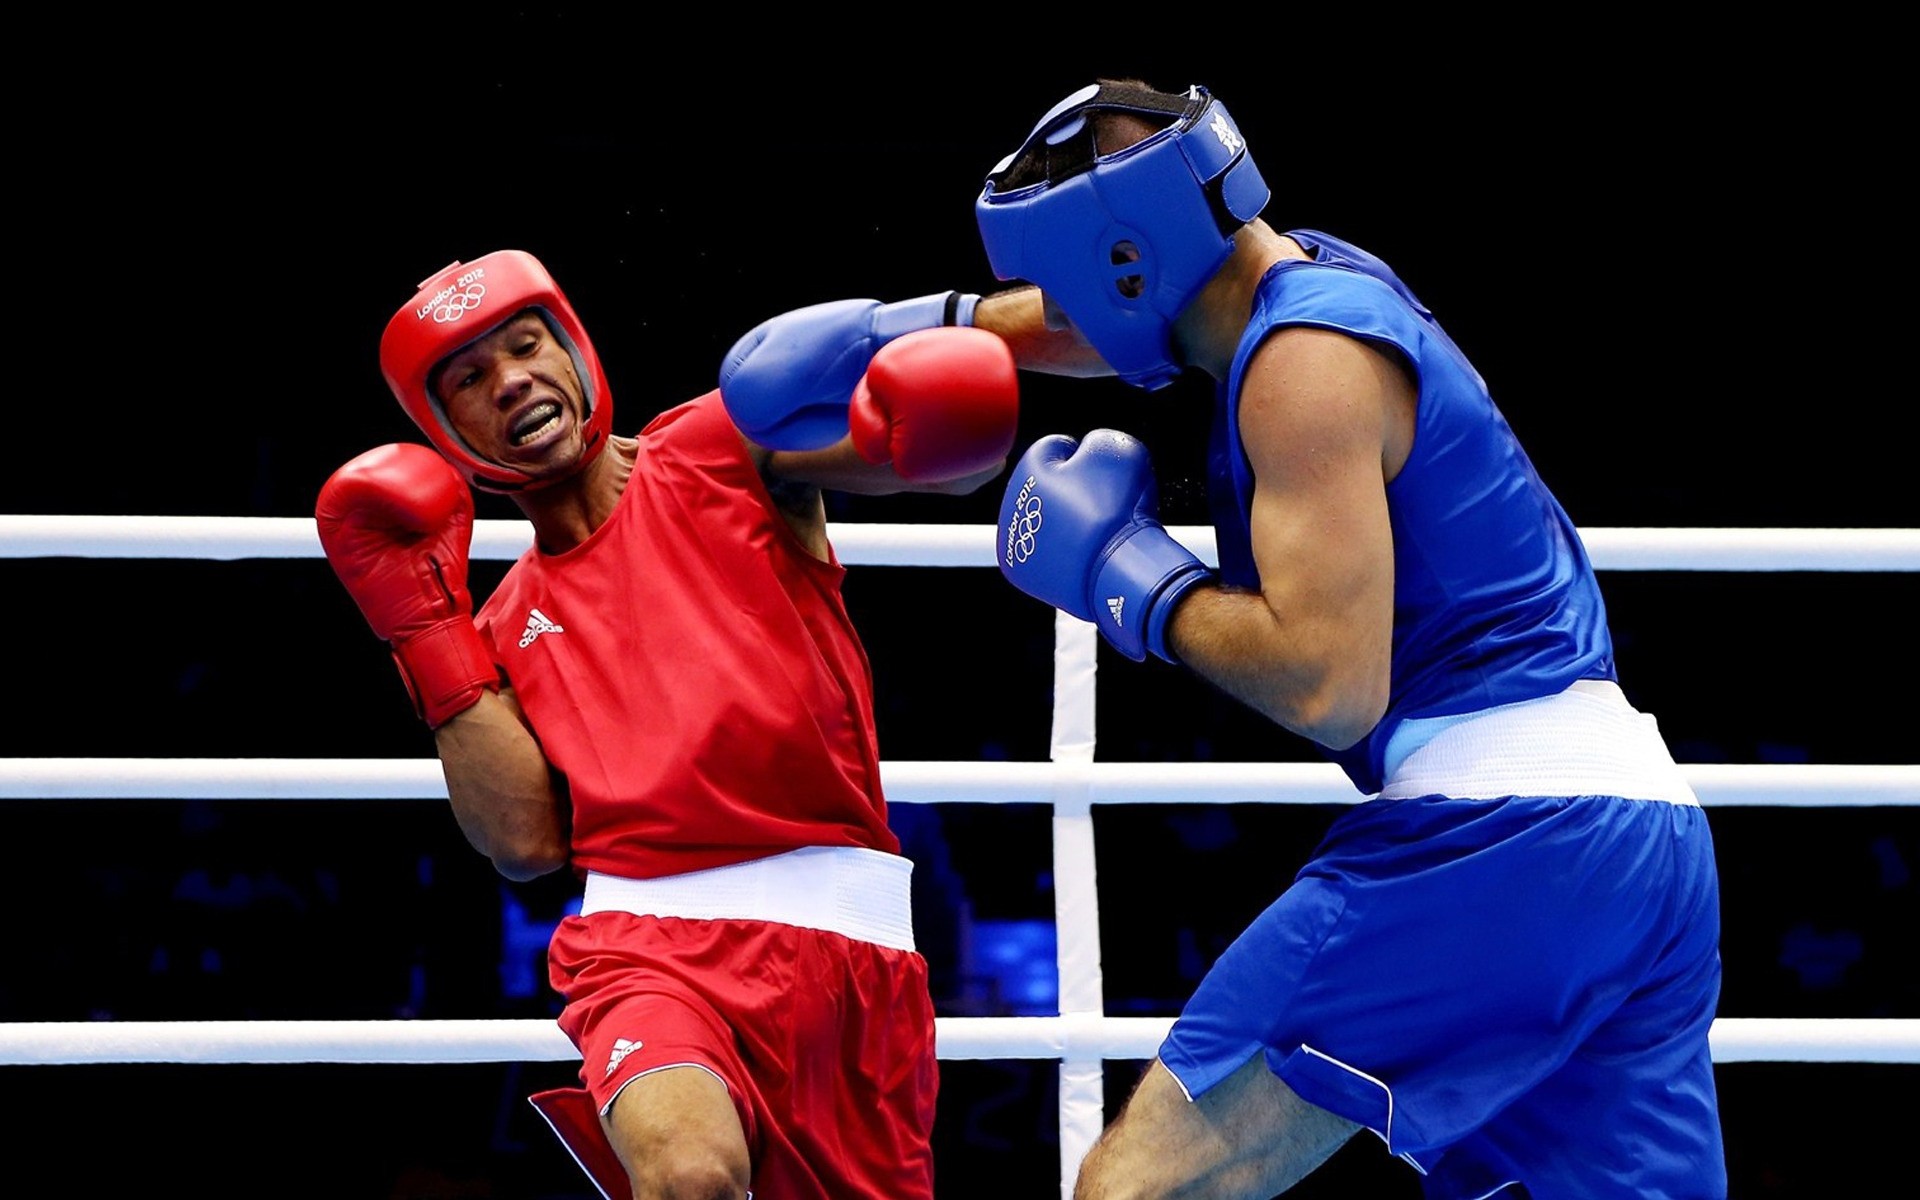 olympic games boxer gloves competition combat punch fighter aggression power strength action knockout fist knock battle champion hit victory athlete strong karate london athelete box olympics